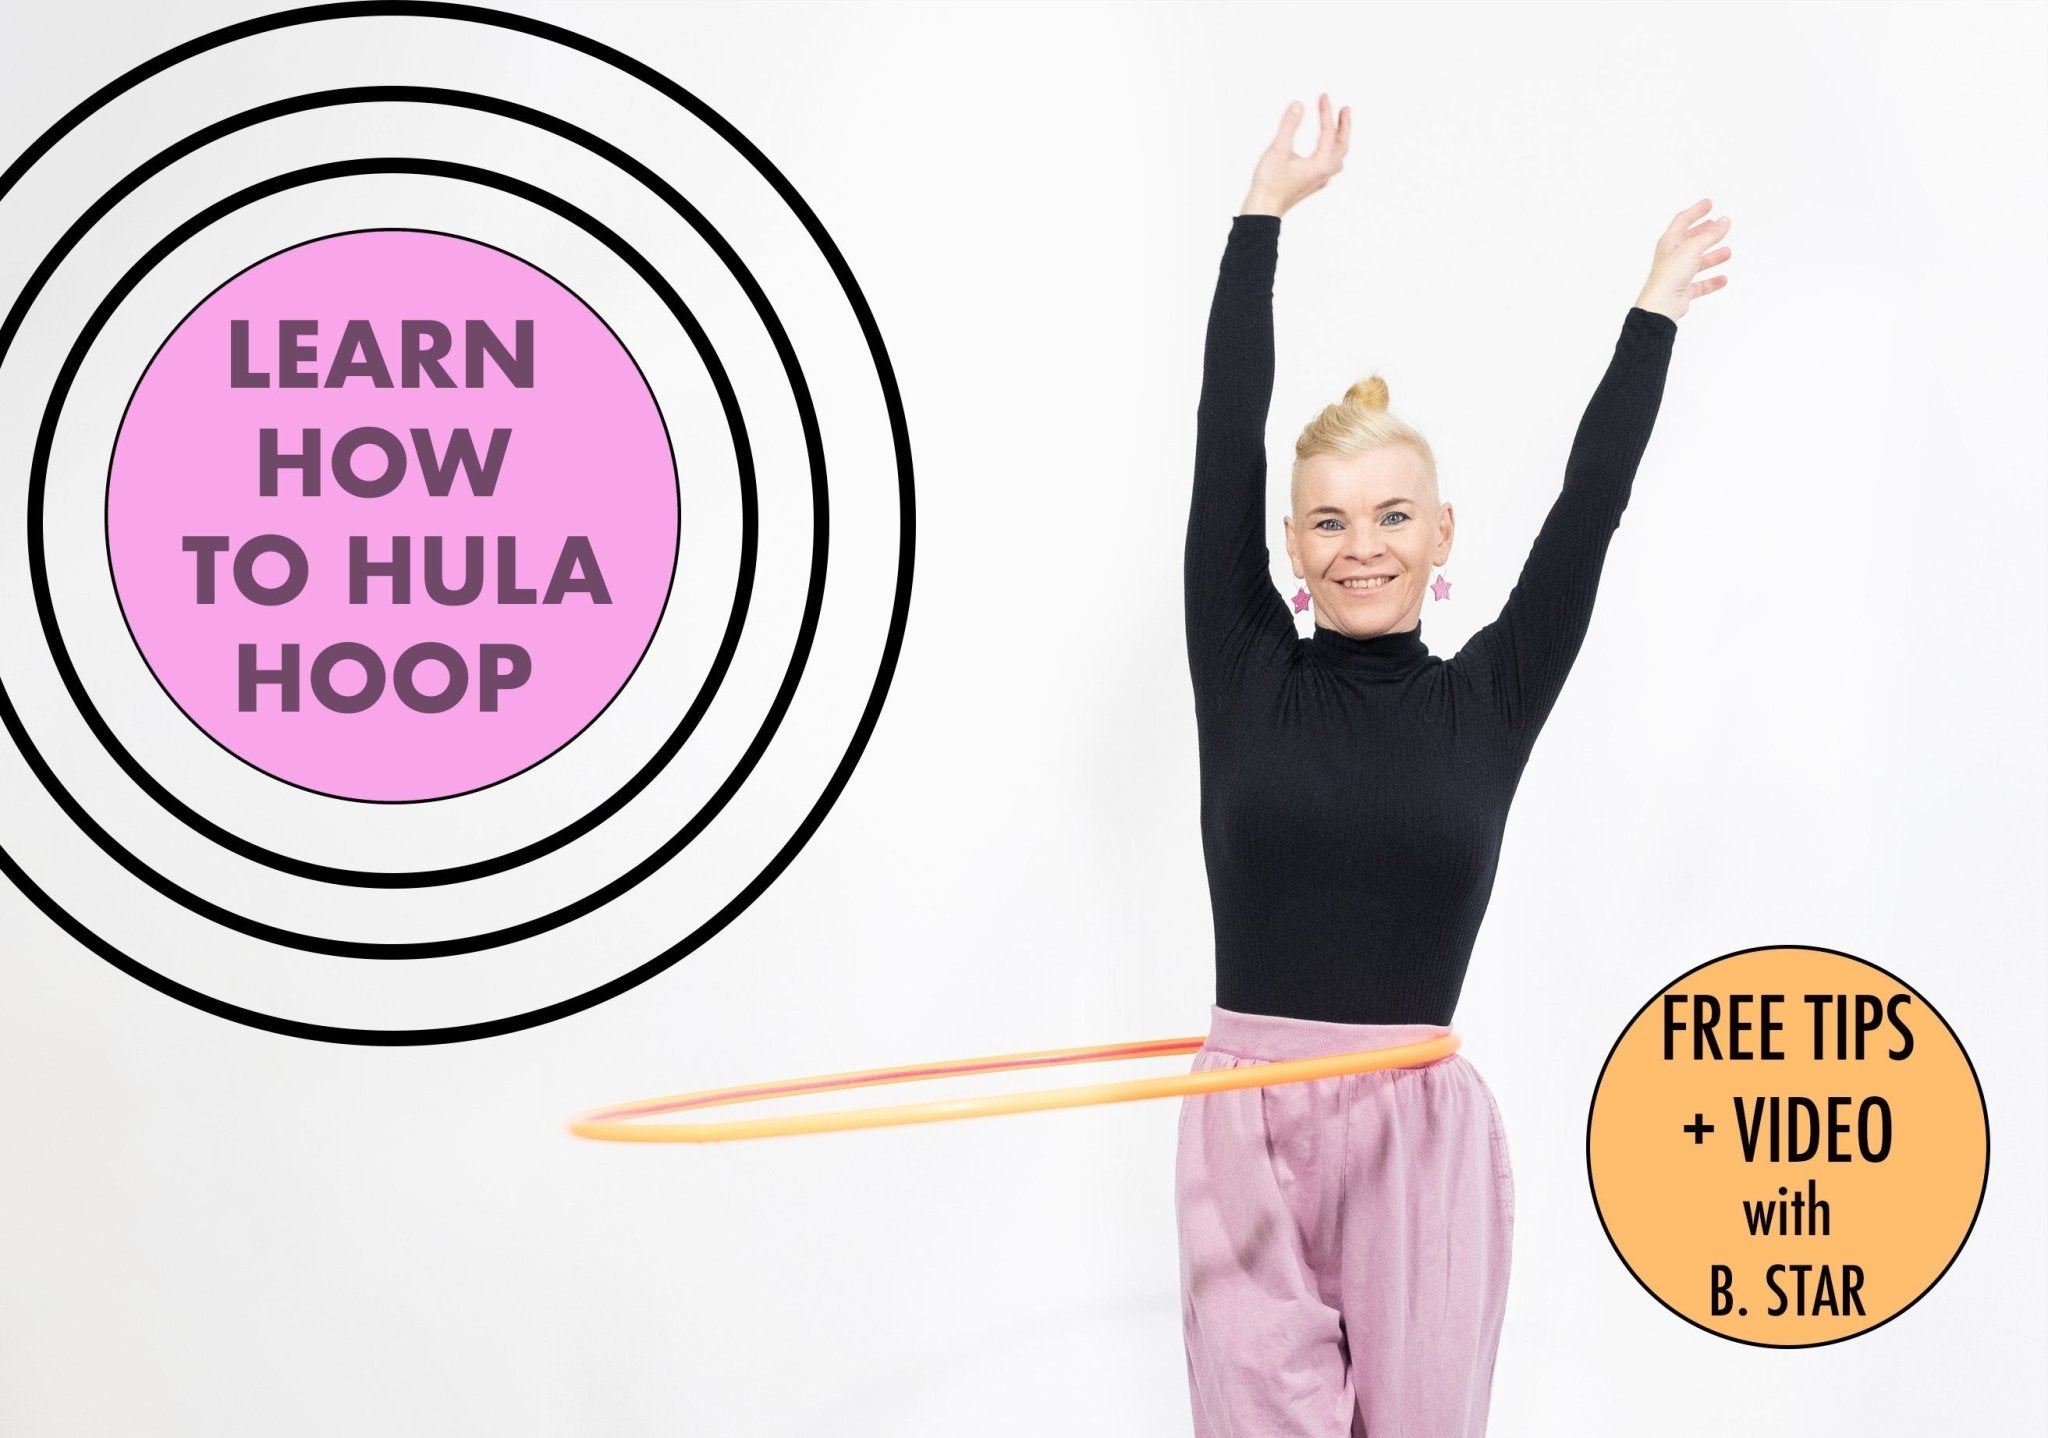 Hoop Fitness - Core Activation Technology